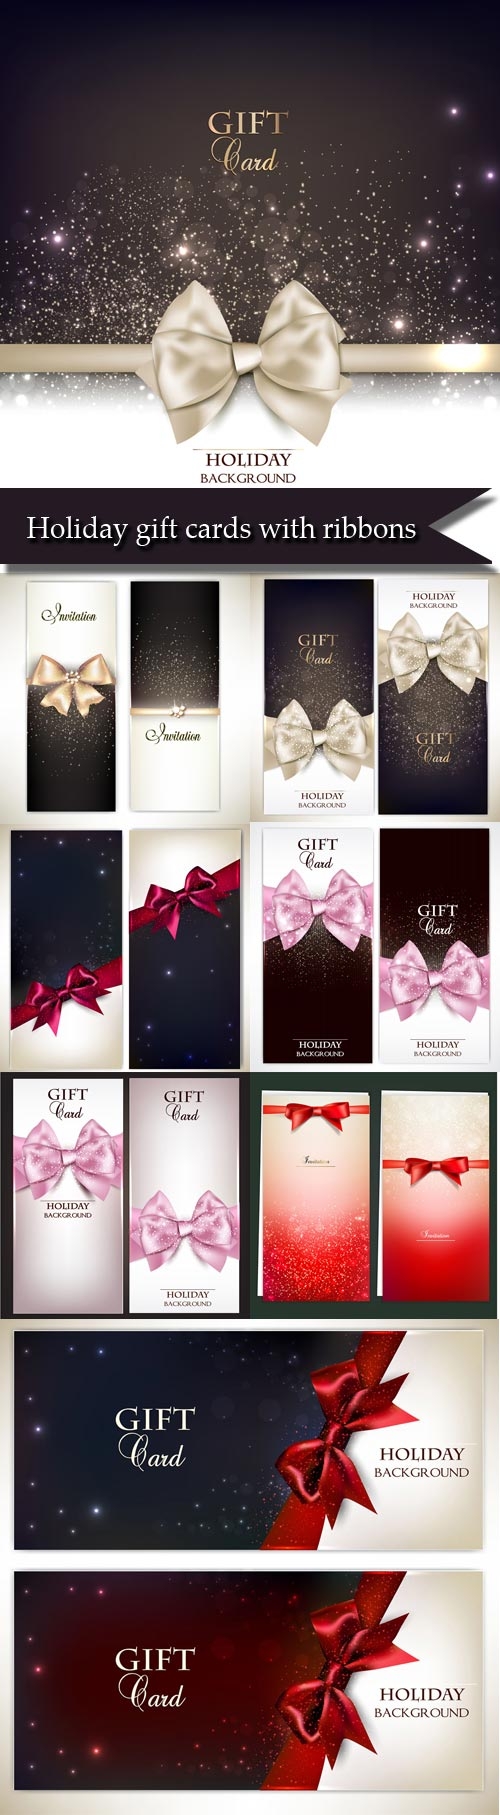 Holiday gift cards with ribbons